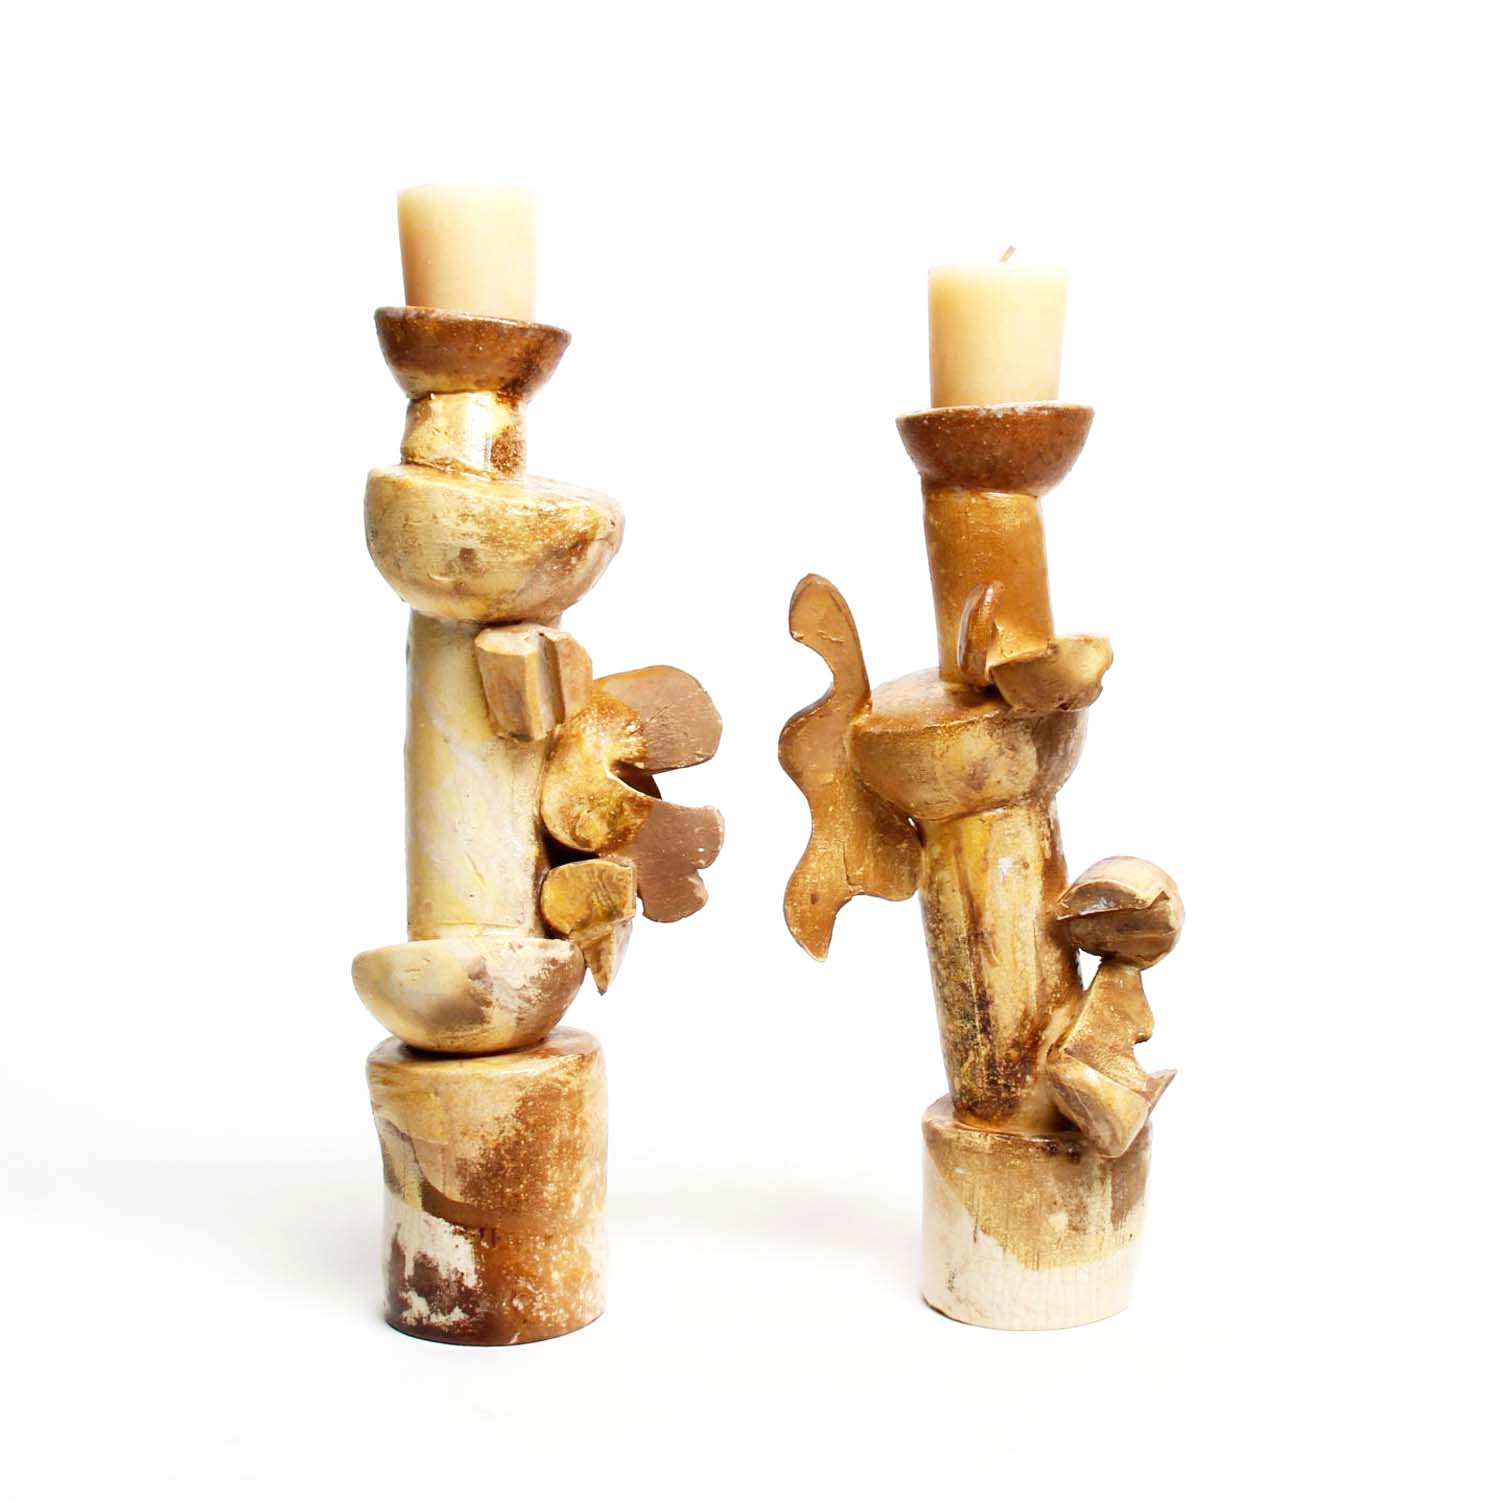 Annie McDonald: Large Candlestick (Each sold separately) Product Image 1 of 4